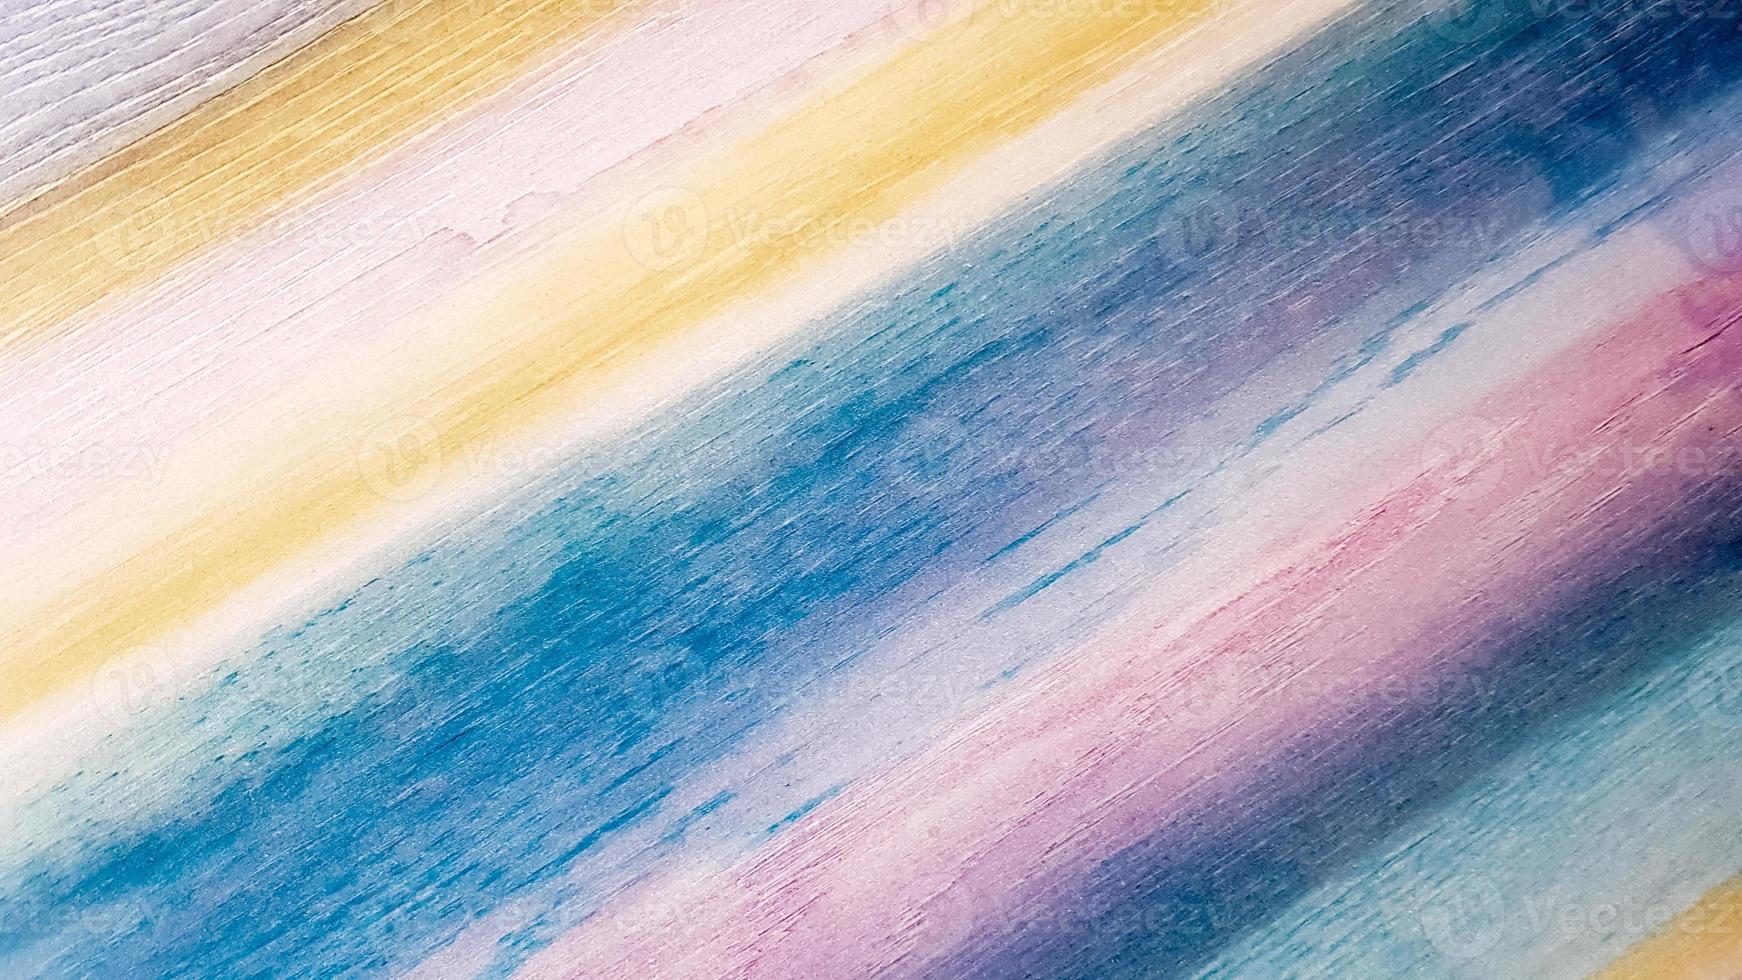 Textured wooden background painted in different colors of the rainbow. Colorful colored abstract background. photo